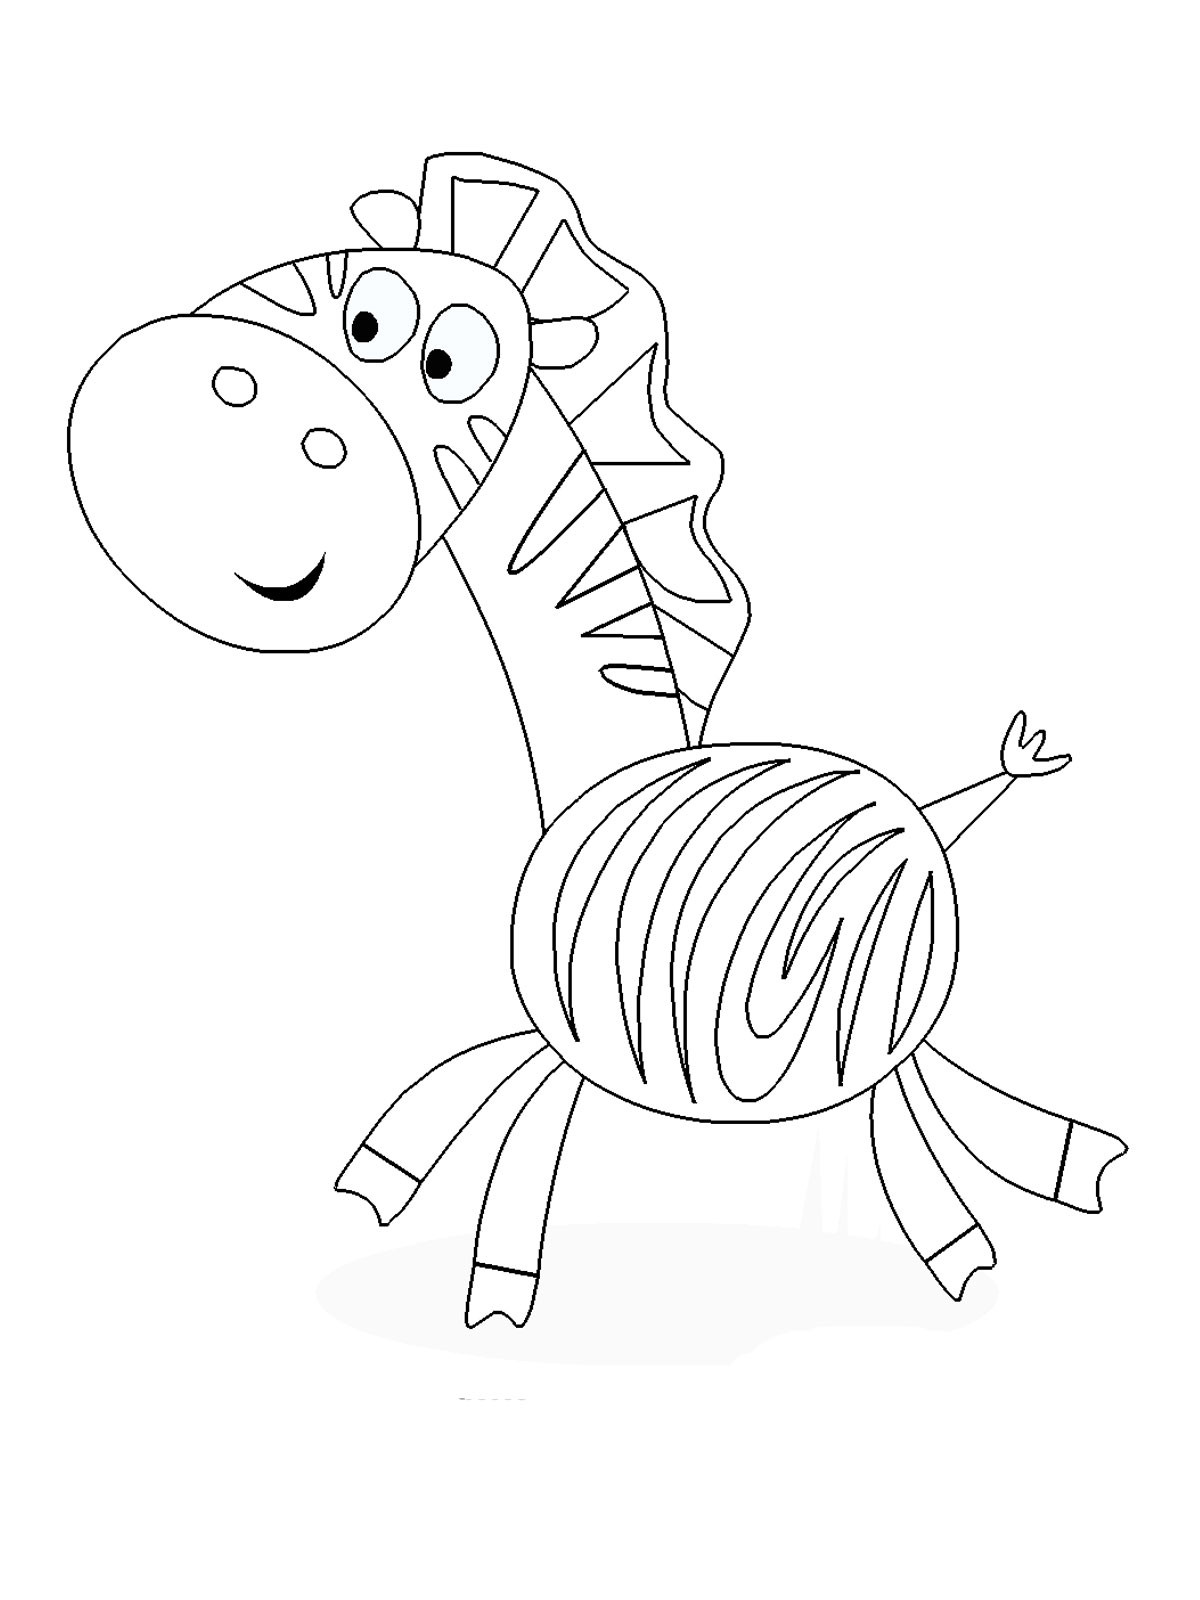 Kids Coloring Pages Online
 Printable coloring pages for kids